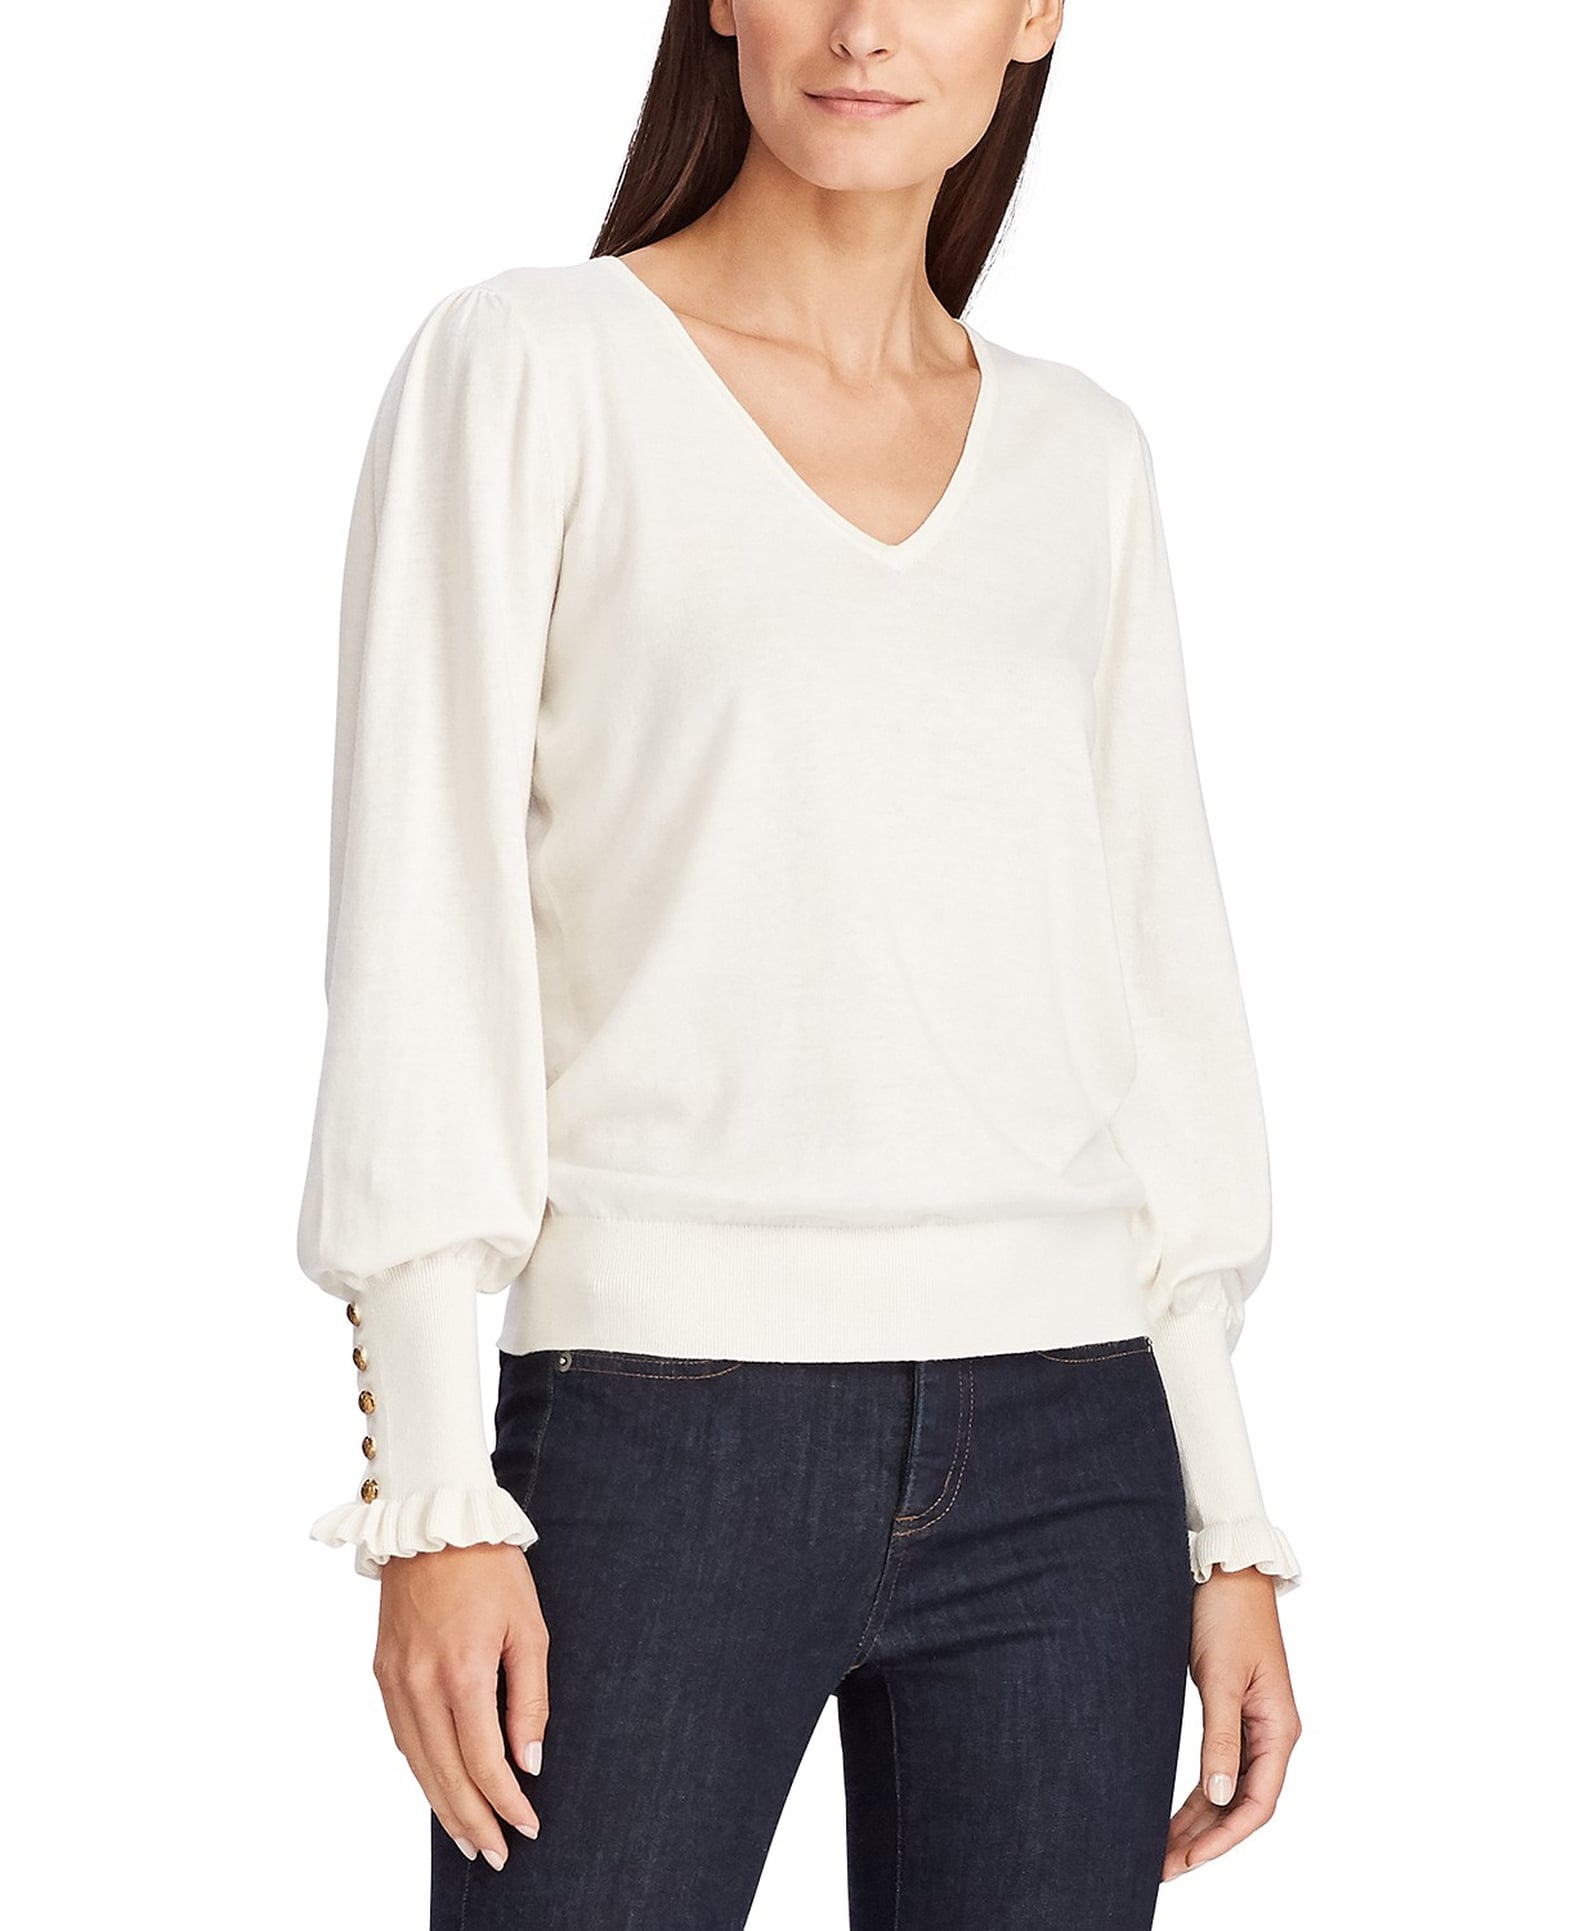 The Most Stylish and Cozy Sweaters From Macy's | POPSUGAR Fashion